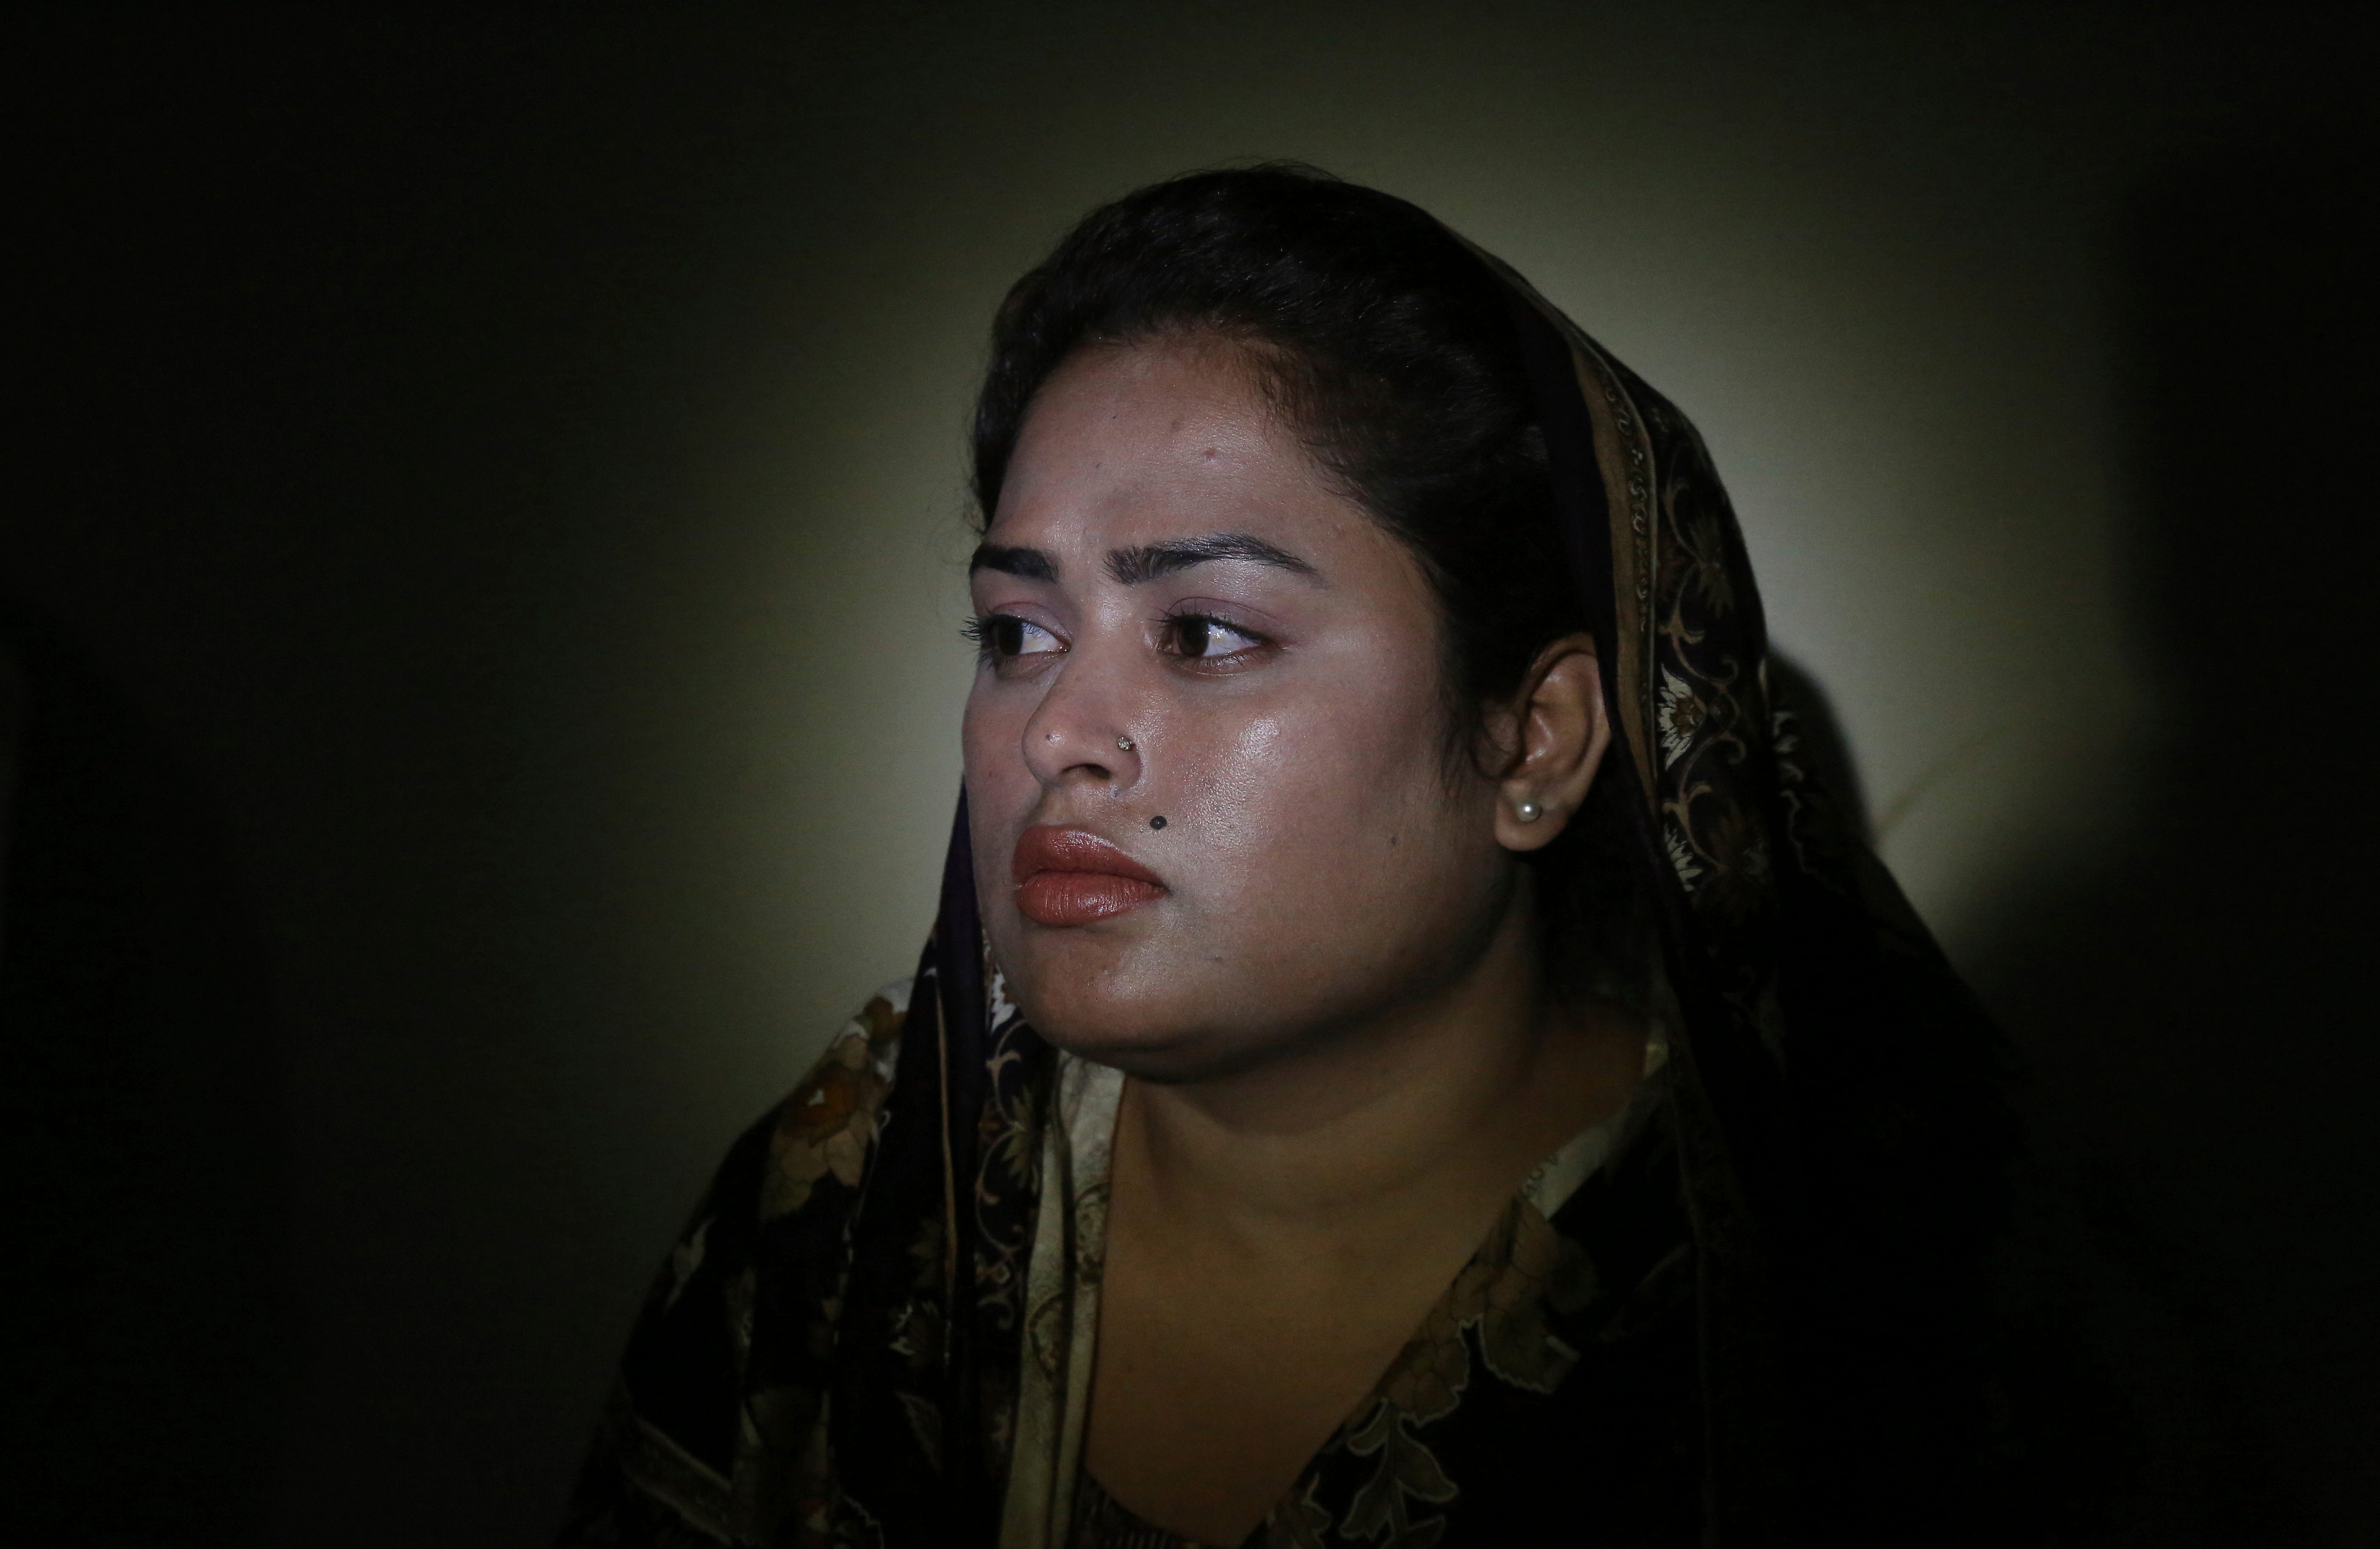 Pakistani women sold in marriage, then prostitution in China